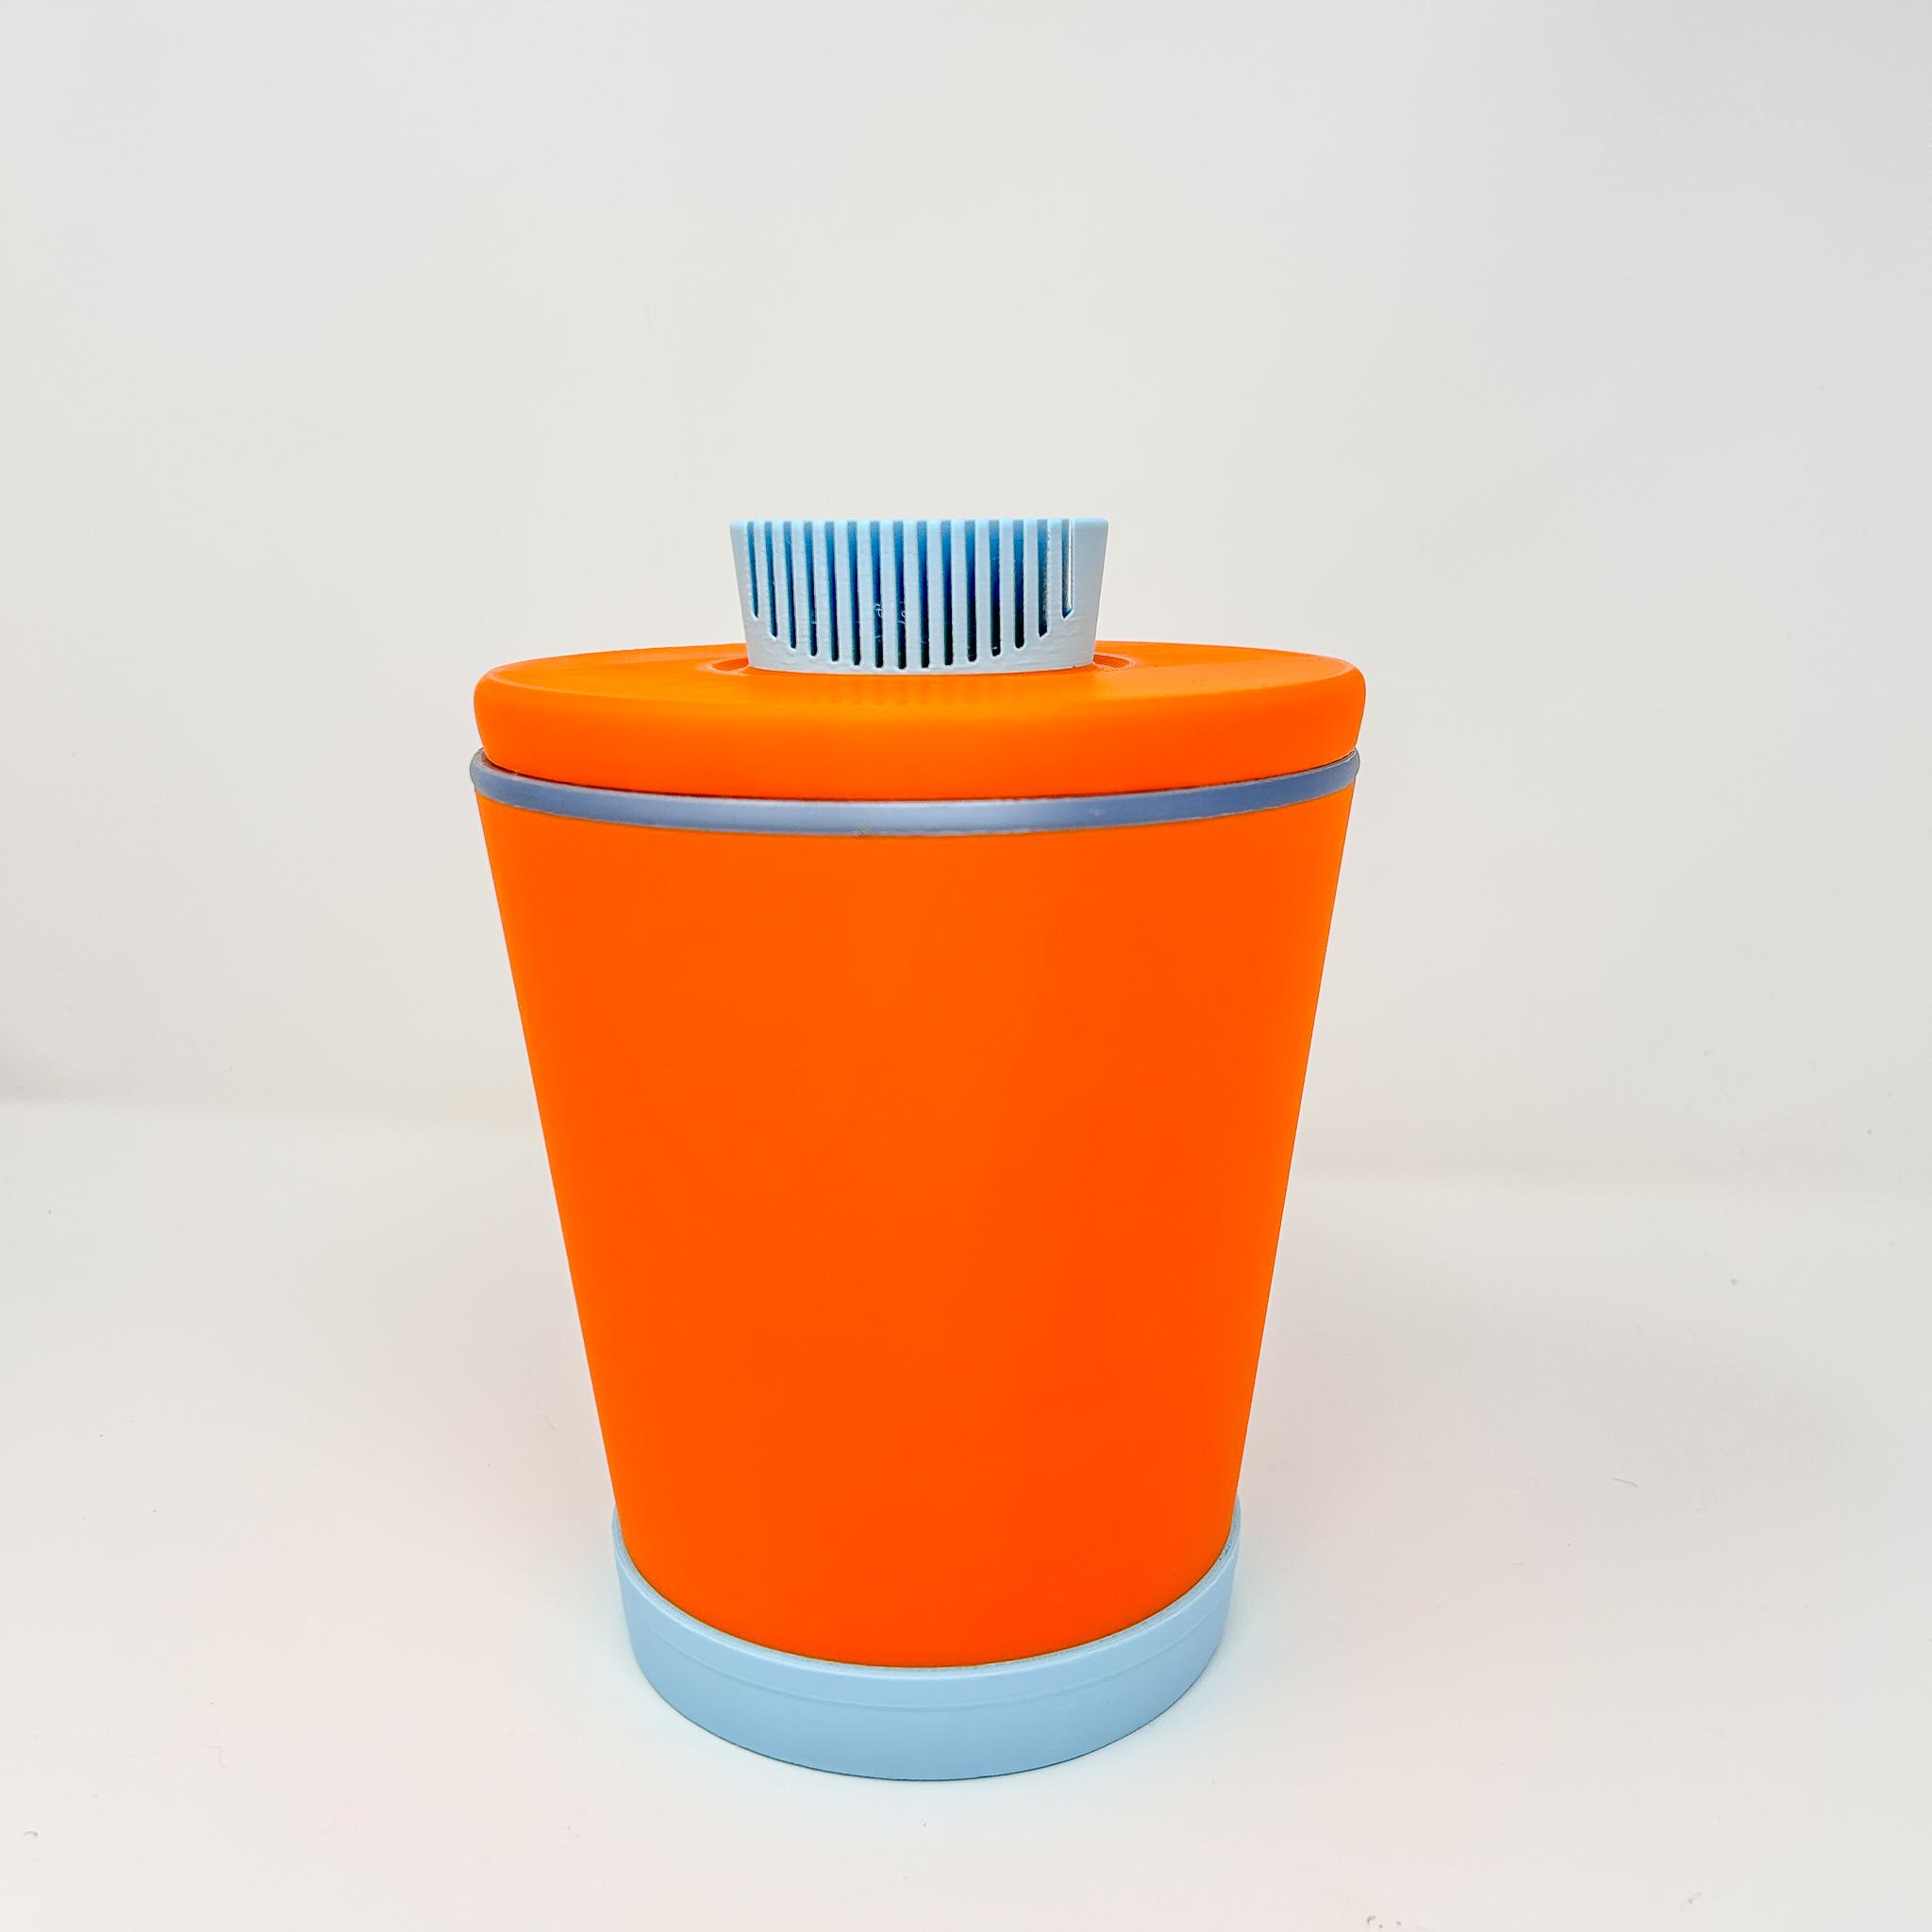 Retro Bucket Organizer - Vintage 1960s-Inspired Knick Knack Organizer with Partitioned Compartments 3d model